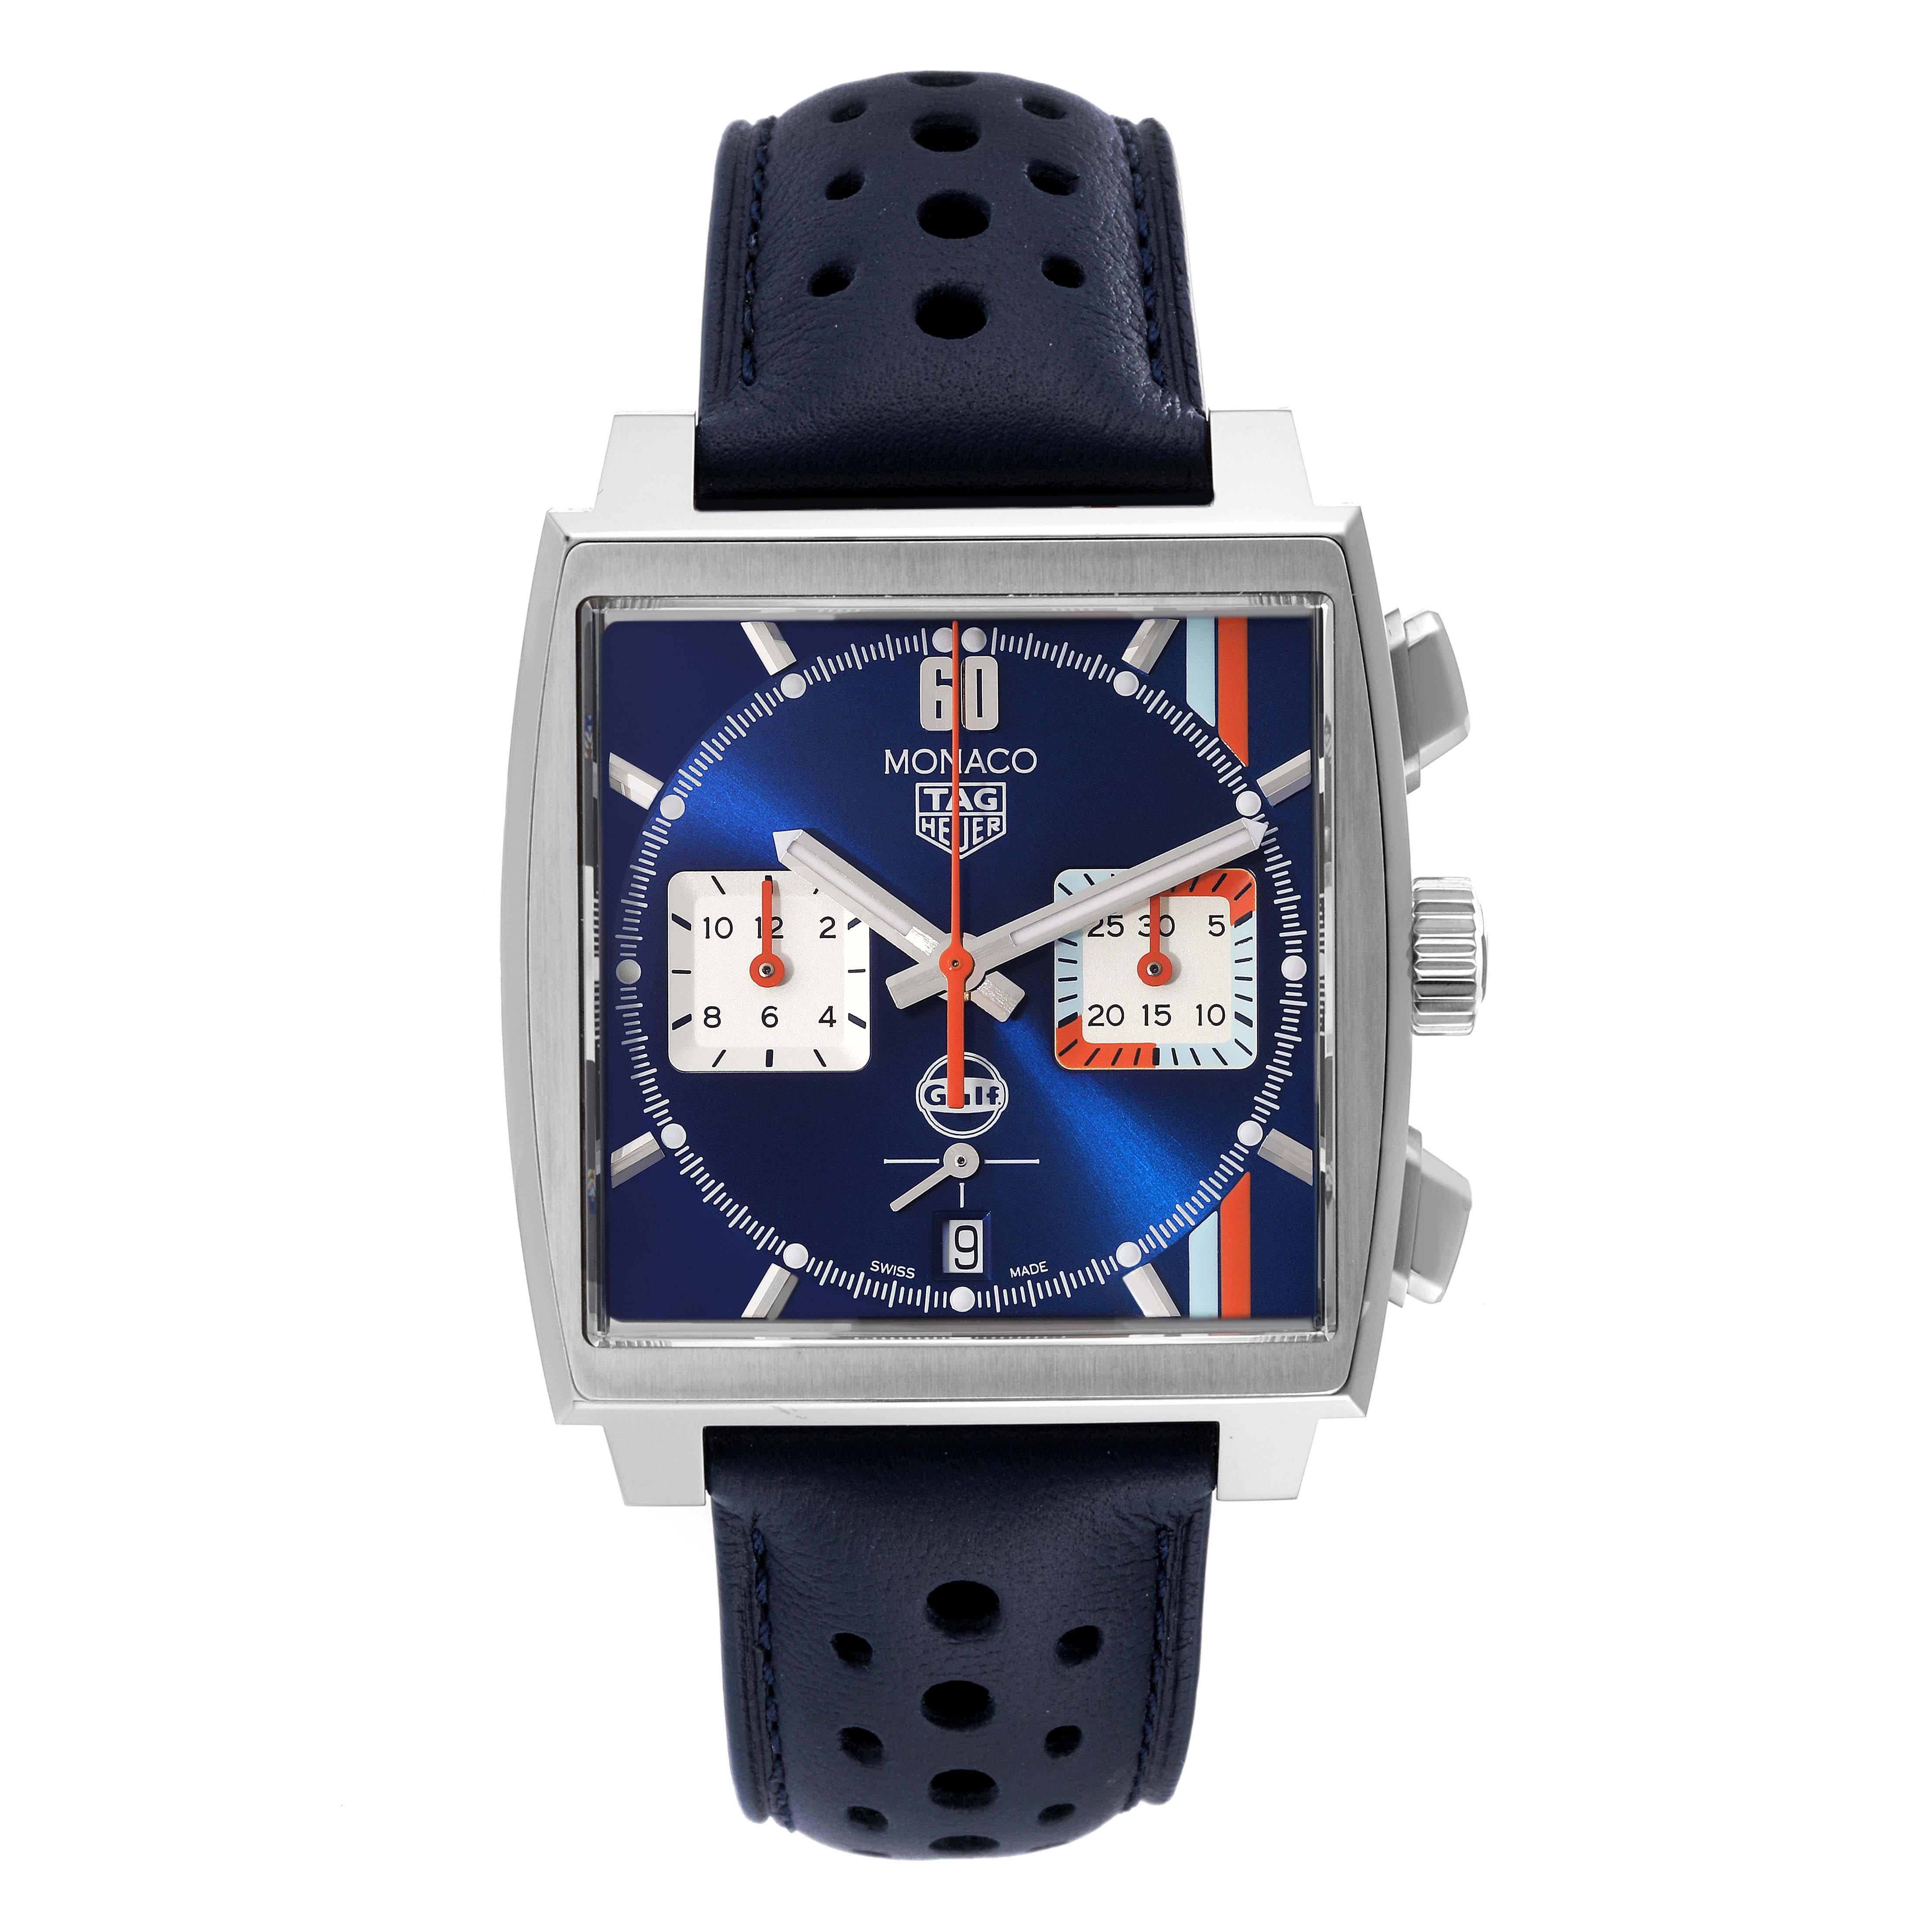 Tag Heuer Monaco Gulf Chronograph Steel Mens Watch CBL2115 Box Card. Automatic self-winding chronograph movement. Alternate fine-brushed and polished stainless steel case 39.0 x 39.0 mm.  Exhibition transparent sapphire crystal caseback. Stainless